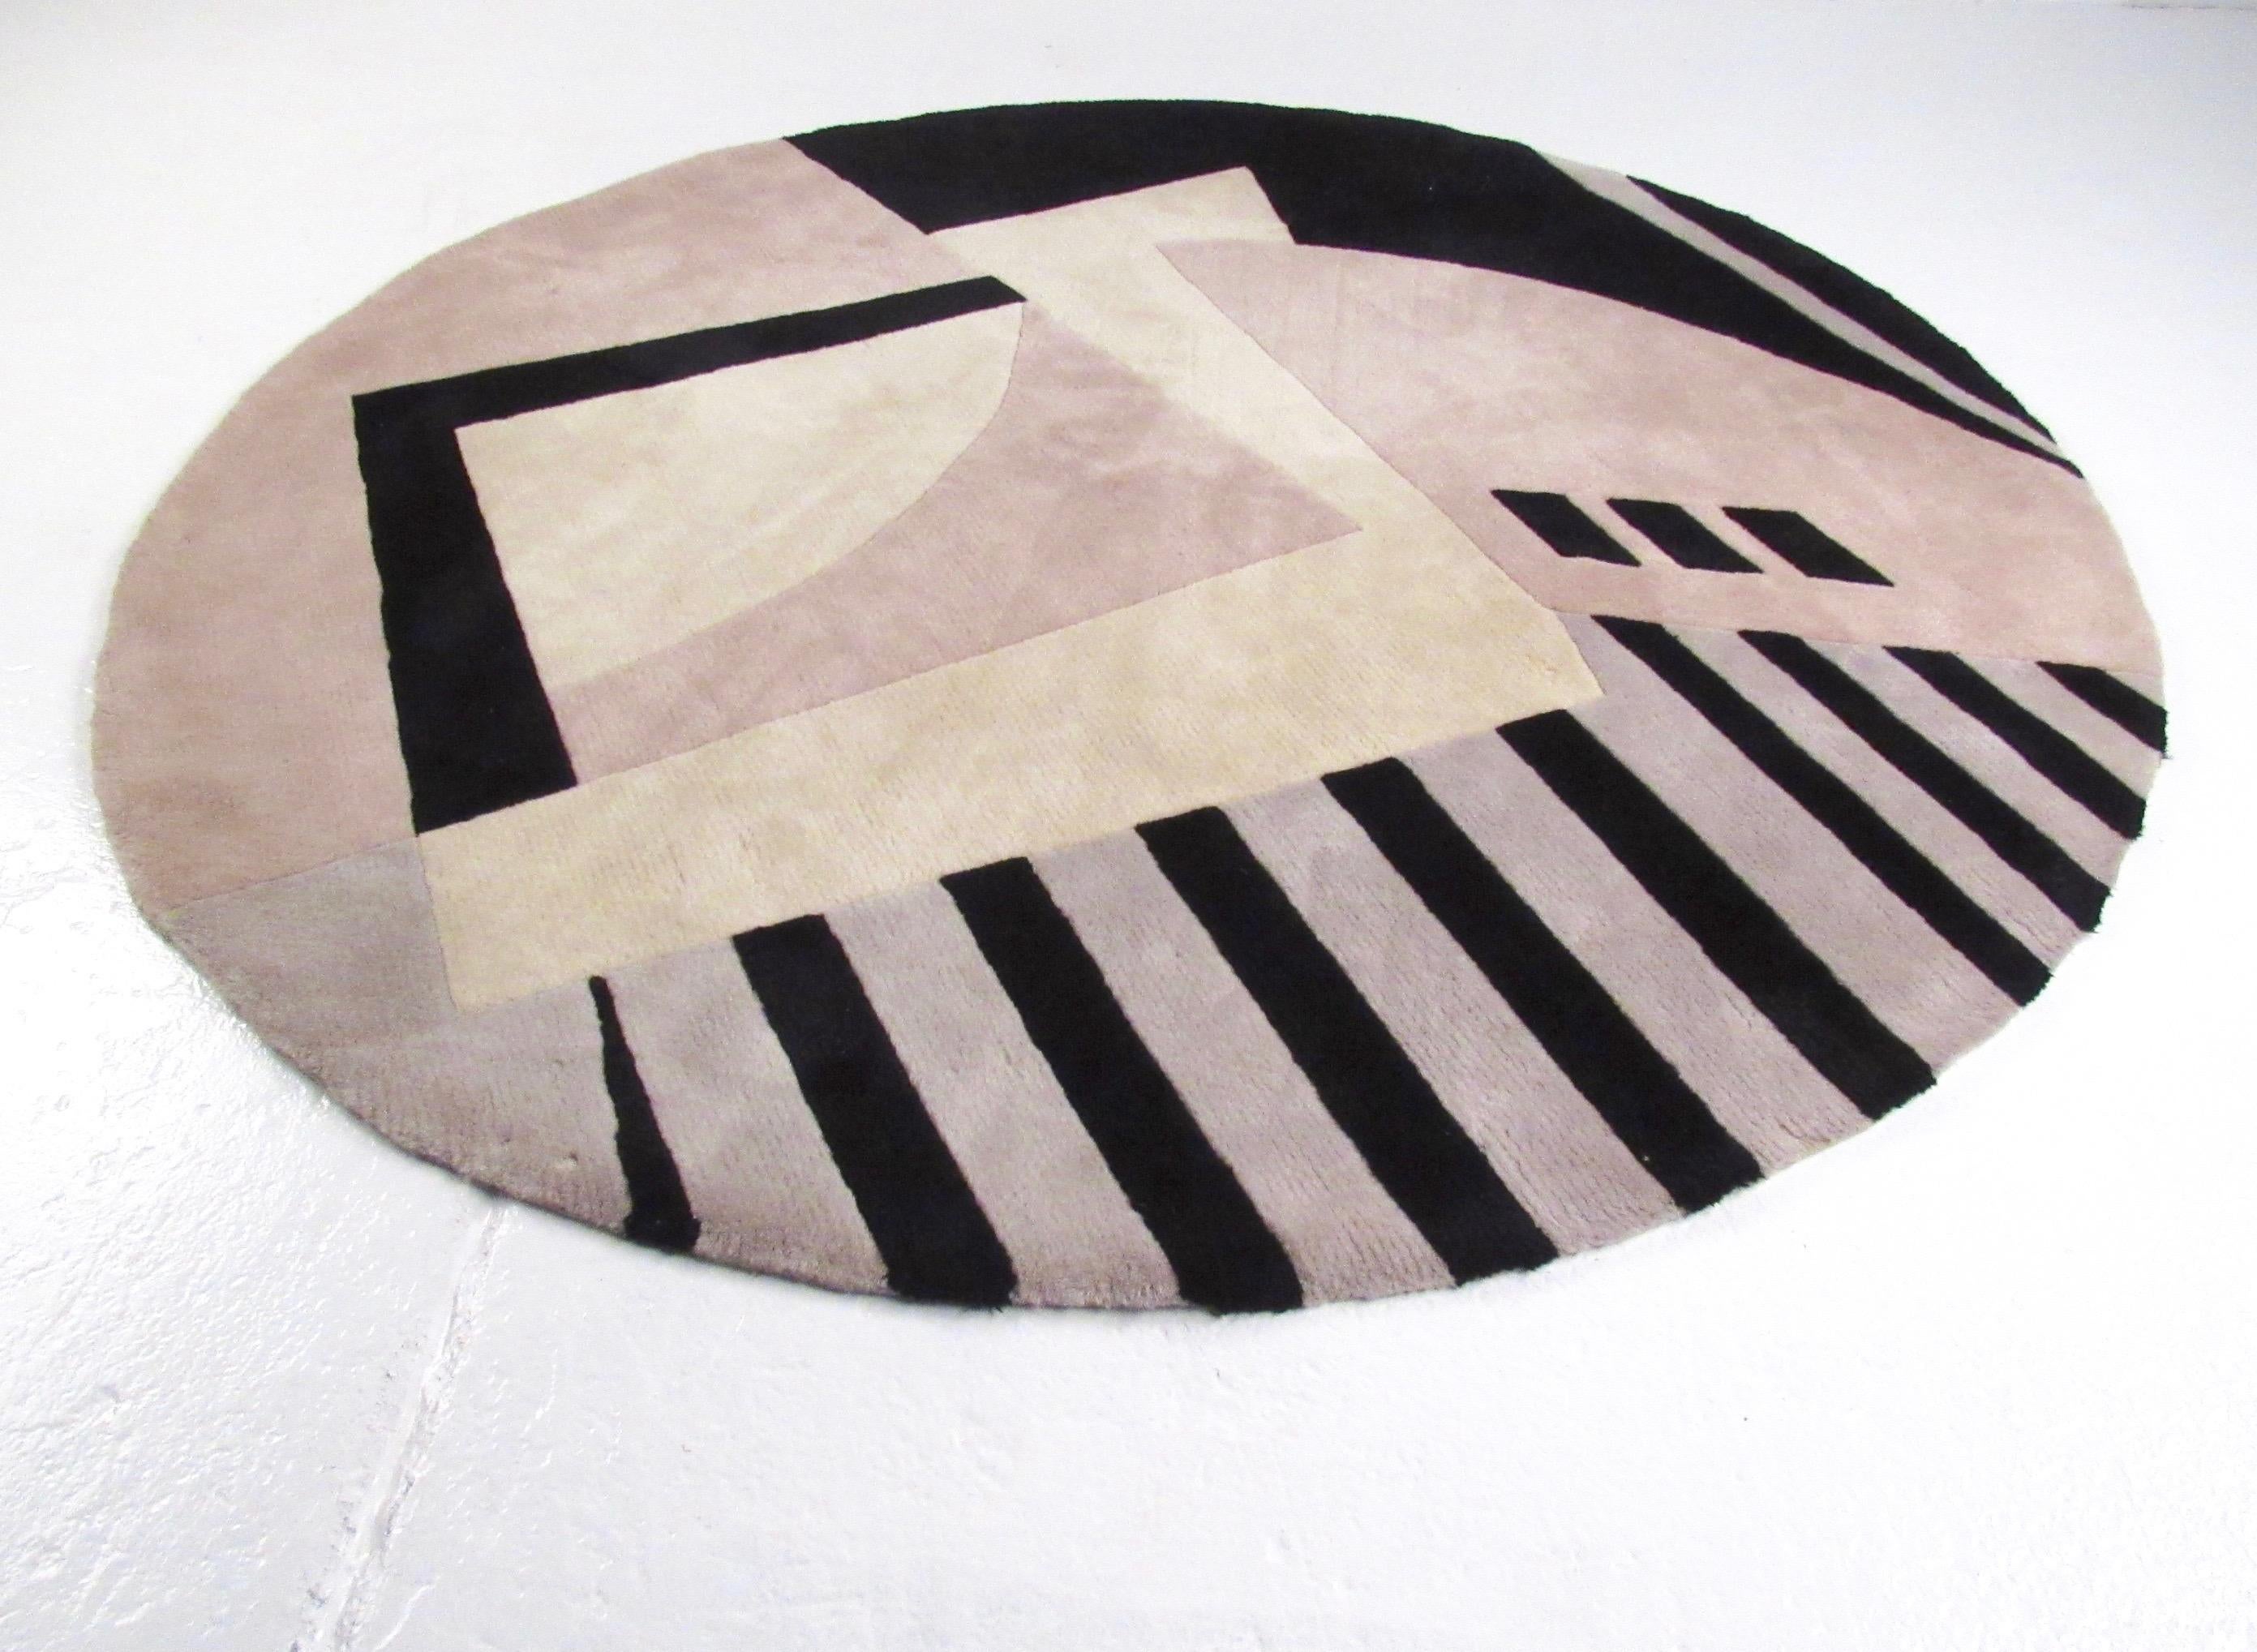 The abstract modern design of this well made circular area rug makes a striking yet subdued deco moderne addition to home or business decor. Please confirm item location (NY or NJ).